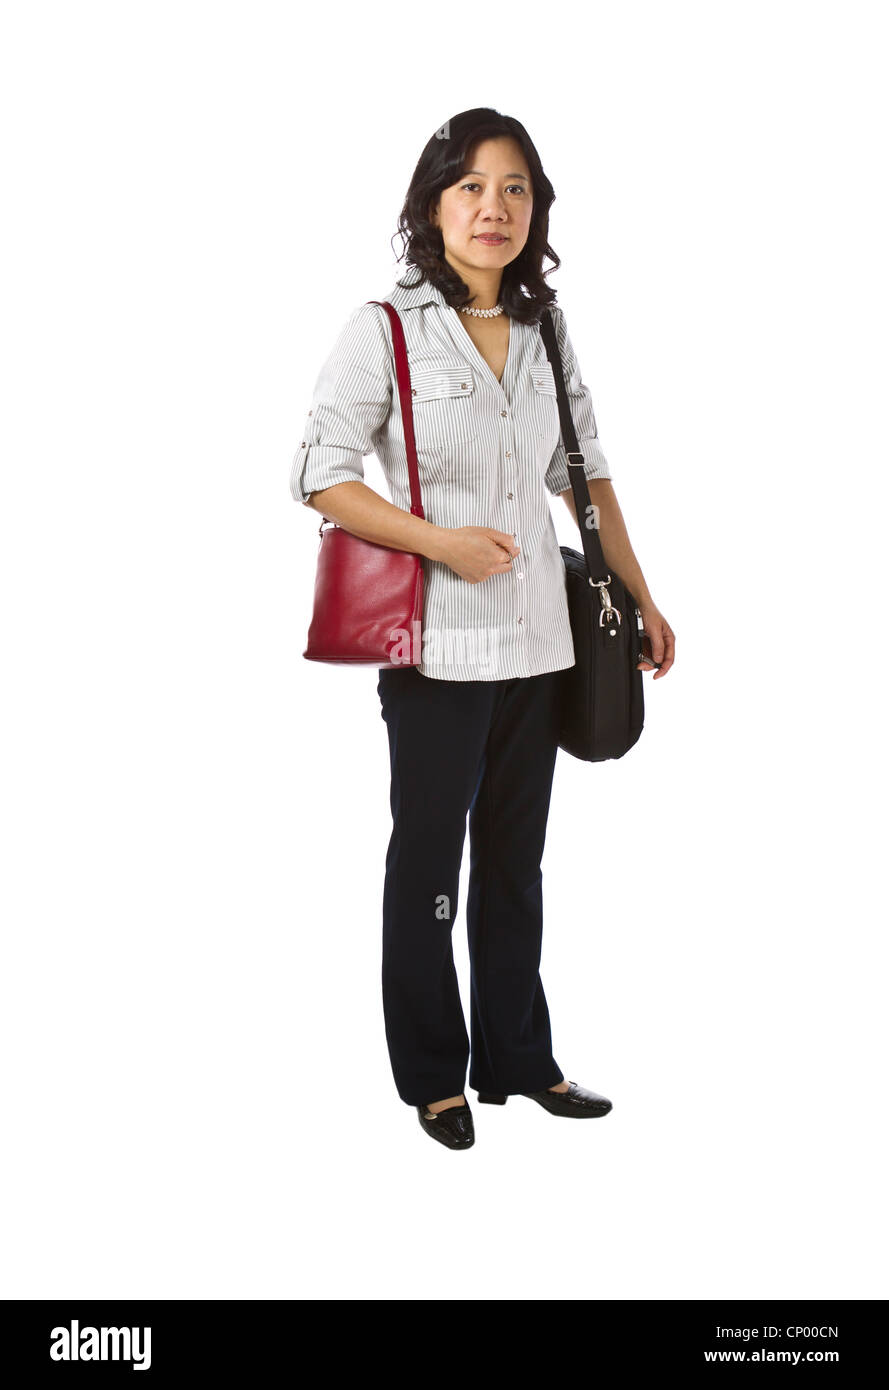 Asian women carry purse and laptop in business causal clothing on white background Stock Photo